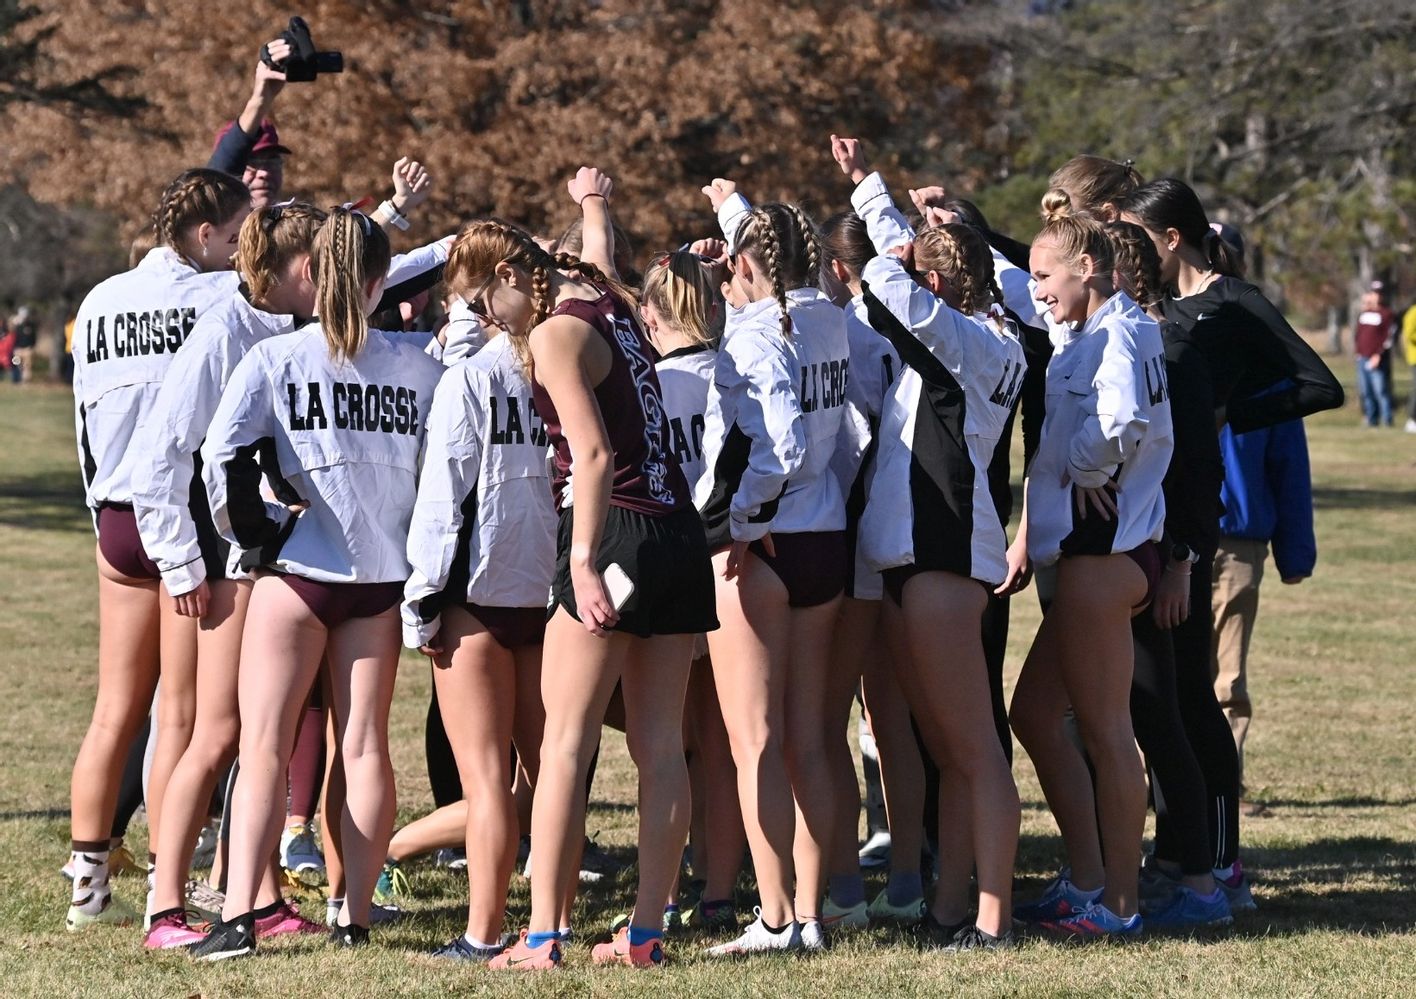 11th-ranked UW-La Crosse women’s cross country team gets set for National Championships on Saturday